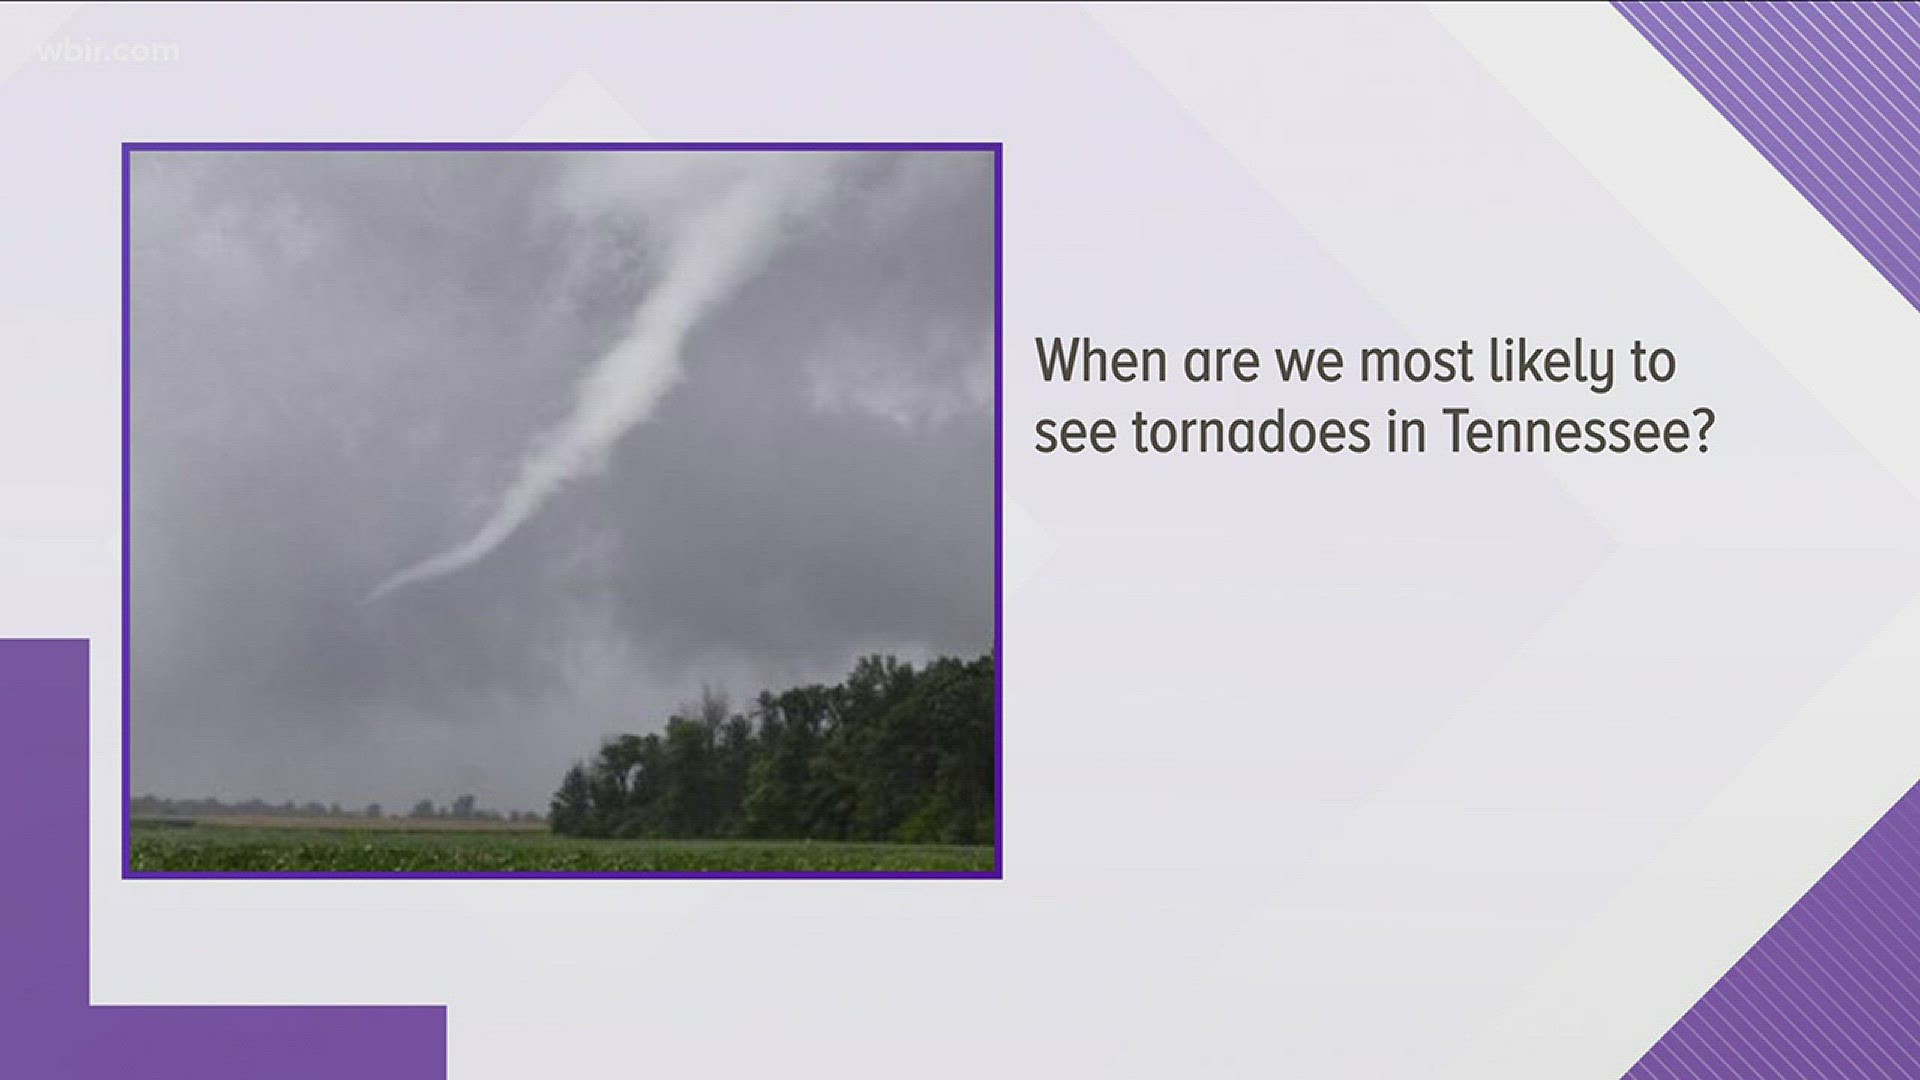 Severe Weather Awareness week has started, and folks asked Todd Howell if we are likely to see tornadoes in Tennessee.